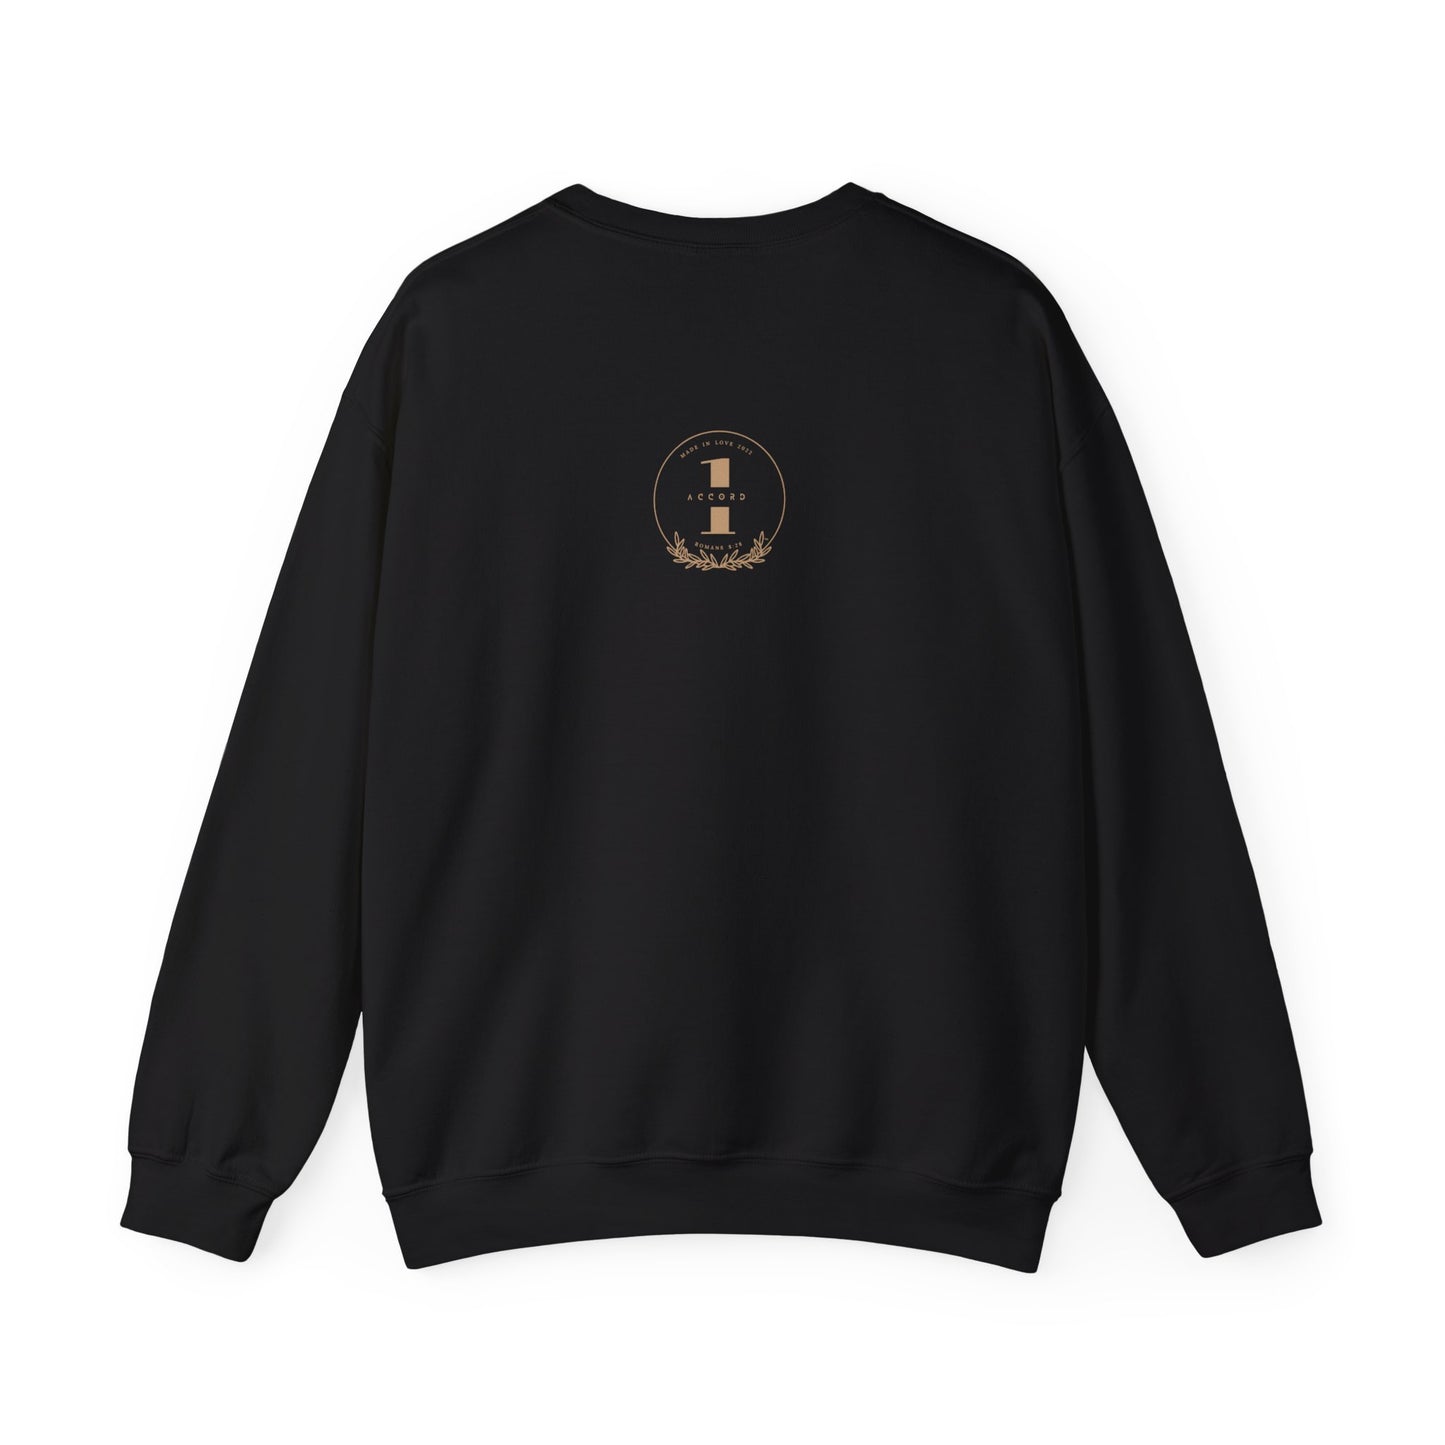 Fearfully and Wonderfully Made Crewneck (Male)